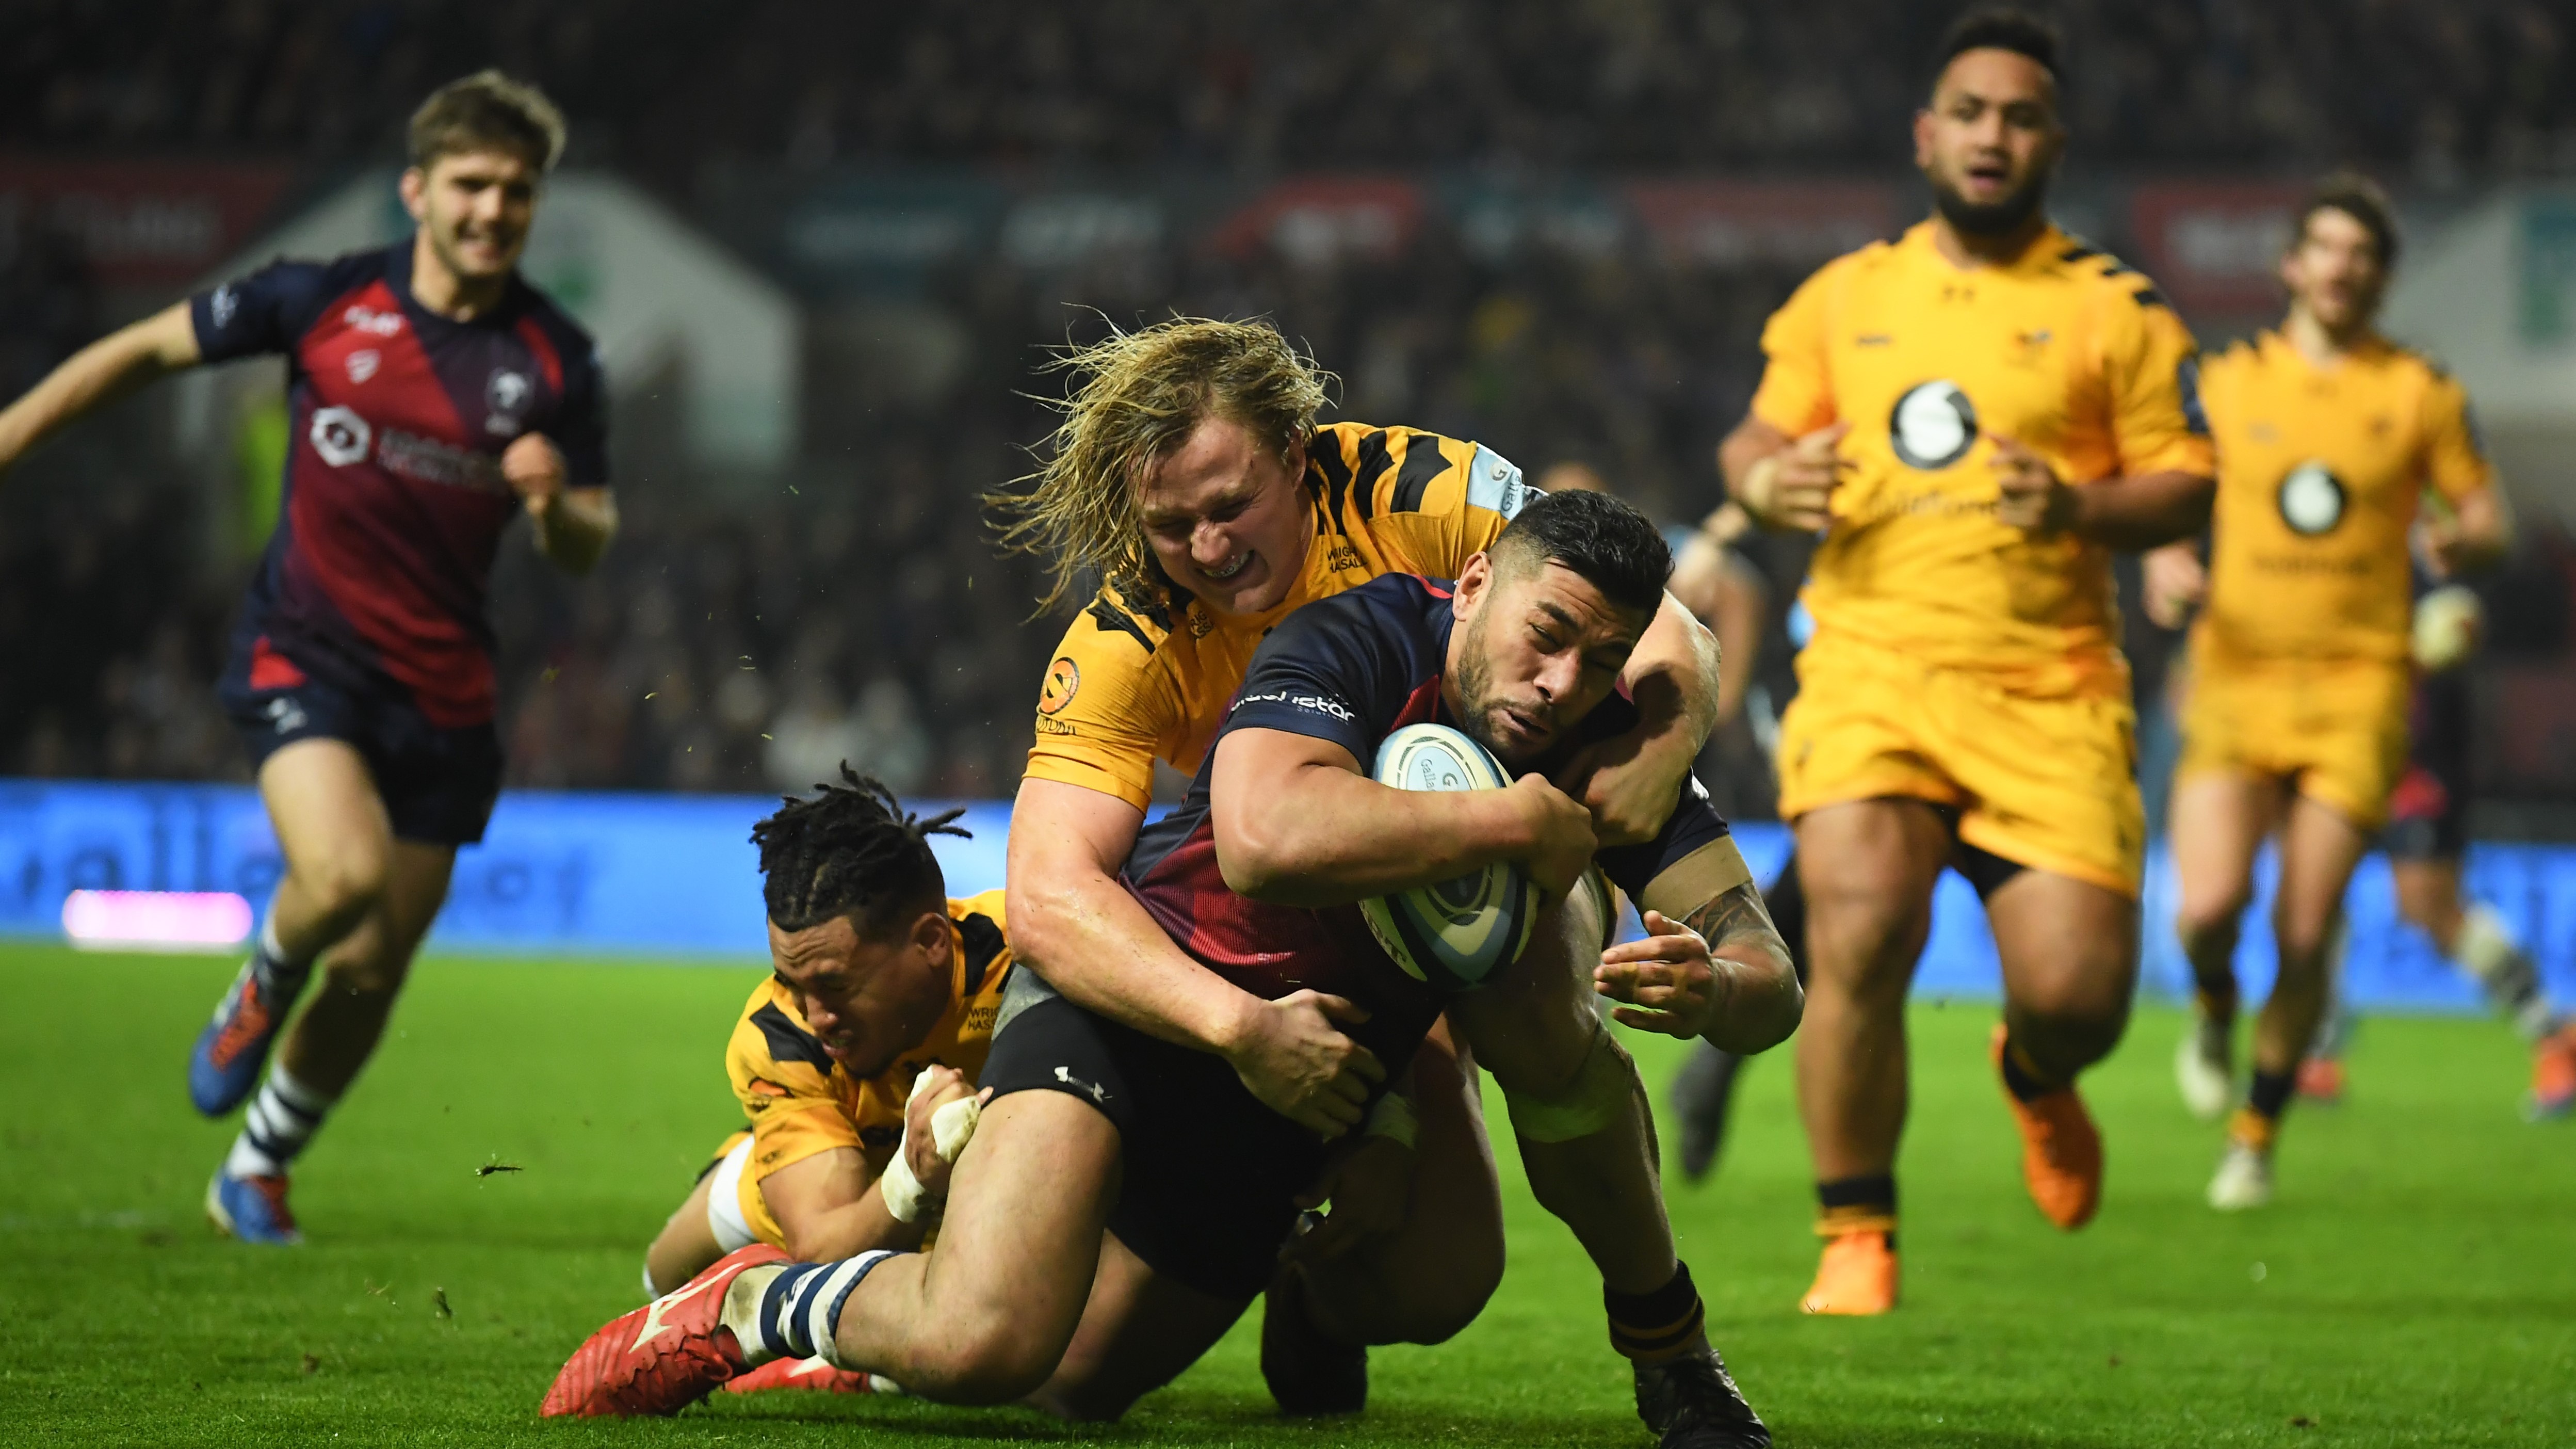 watch live premiership rugby union online